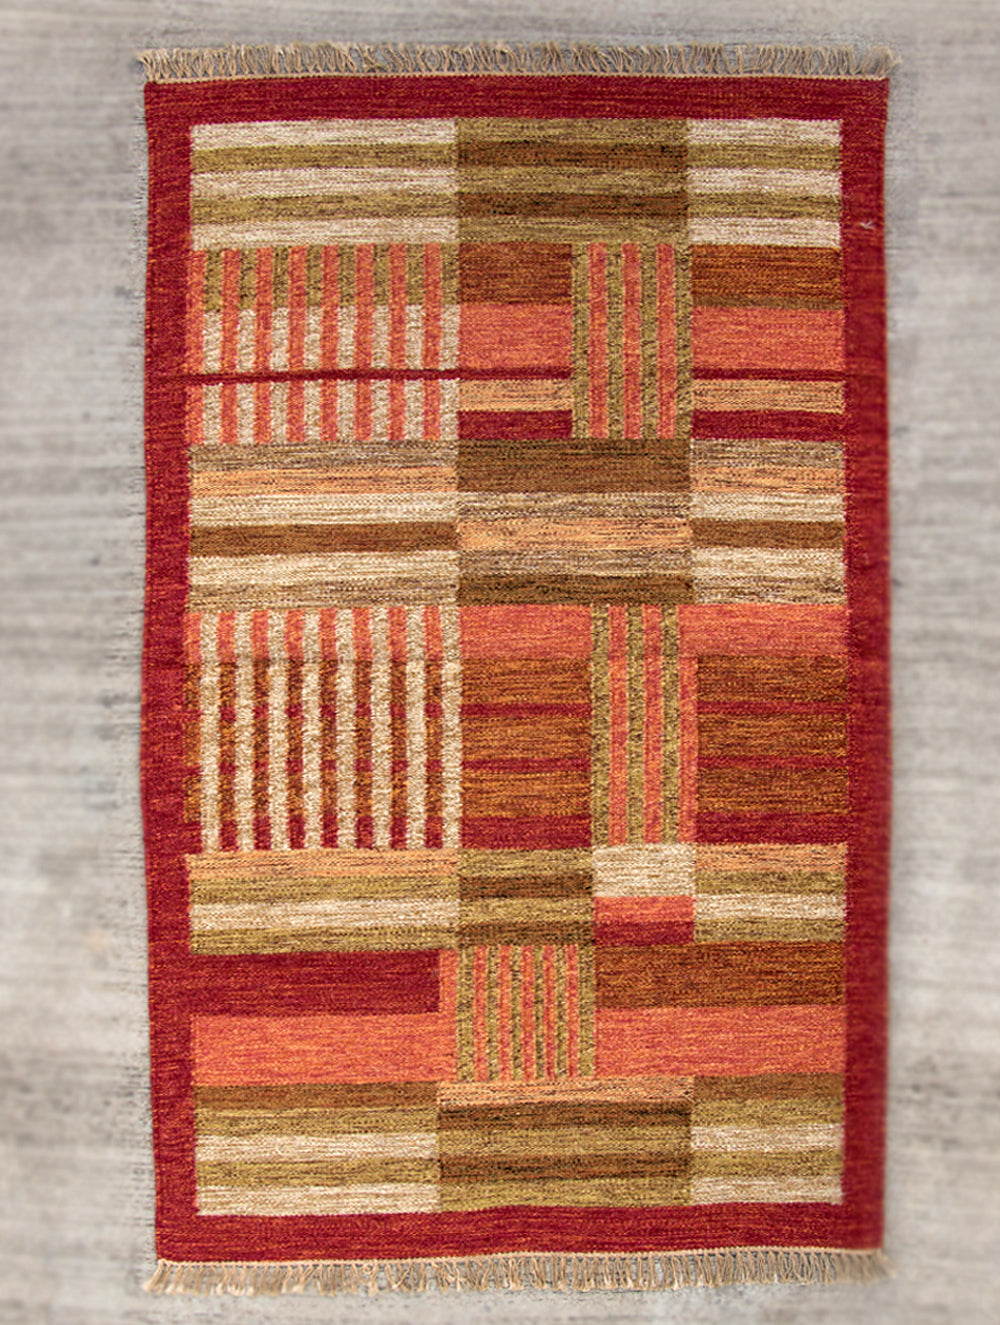 Load image into Gallery viewer, Handwoven Kilim Rug (6 x 4 ft) - Geometric - The India Craft House 